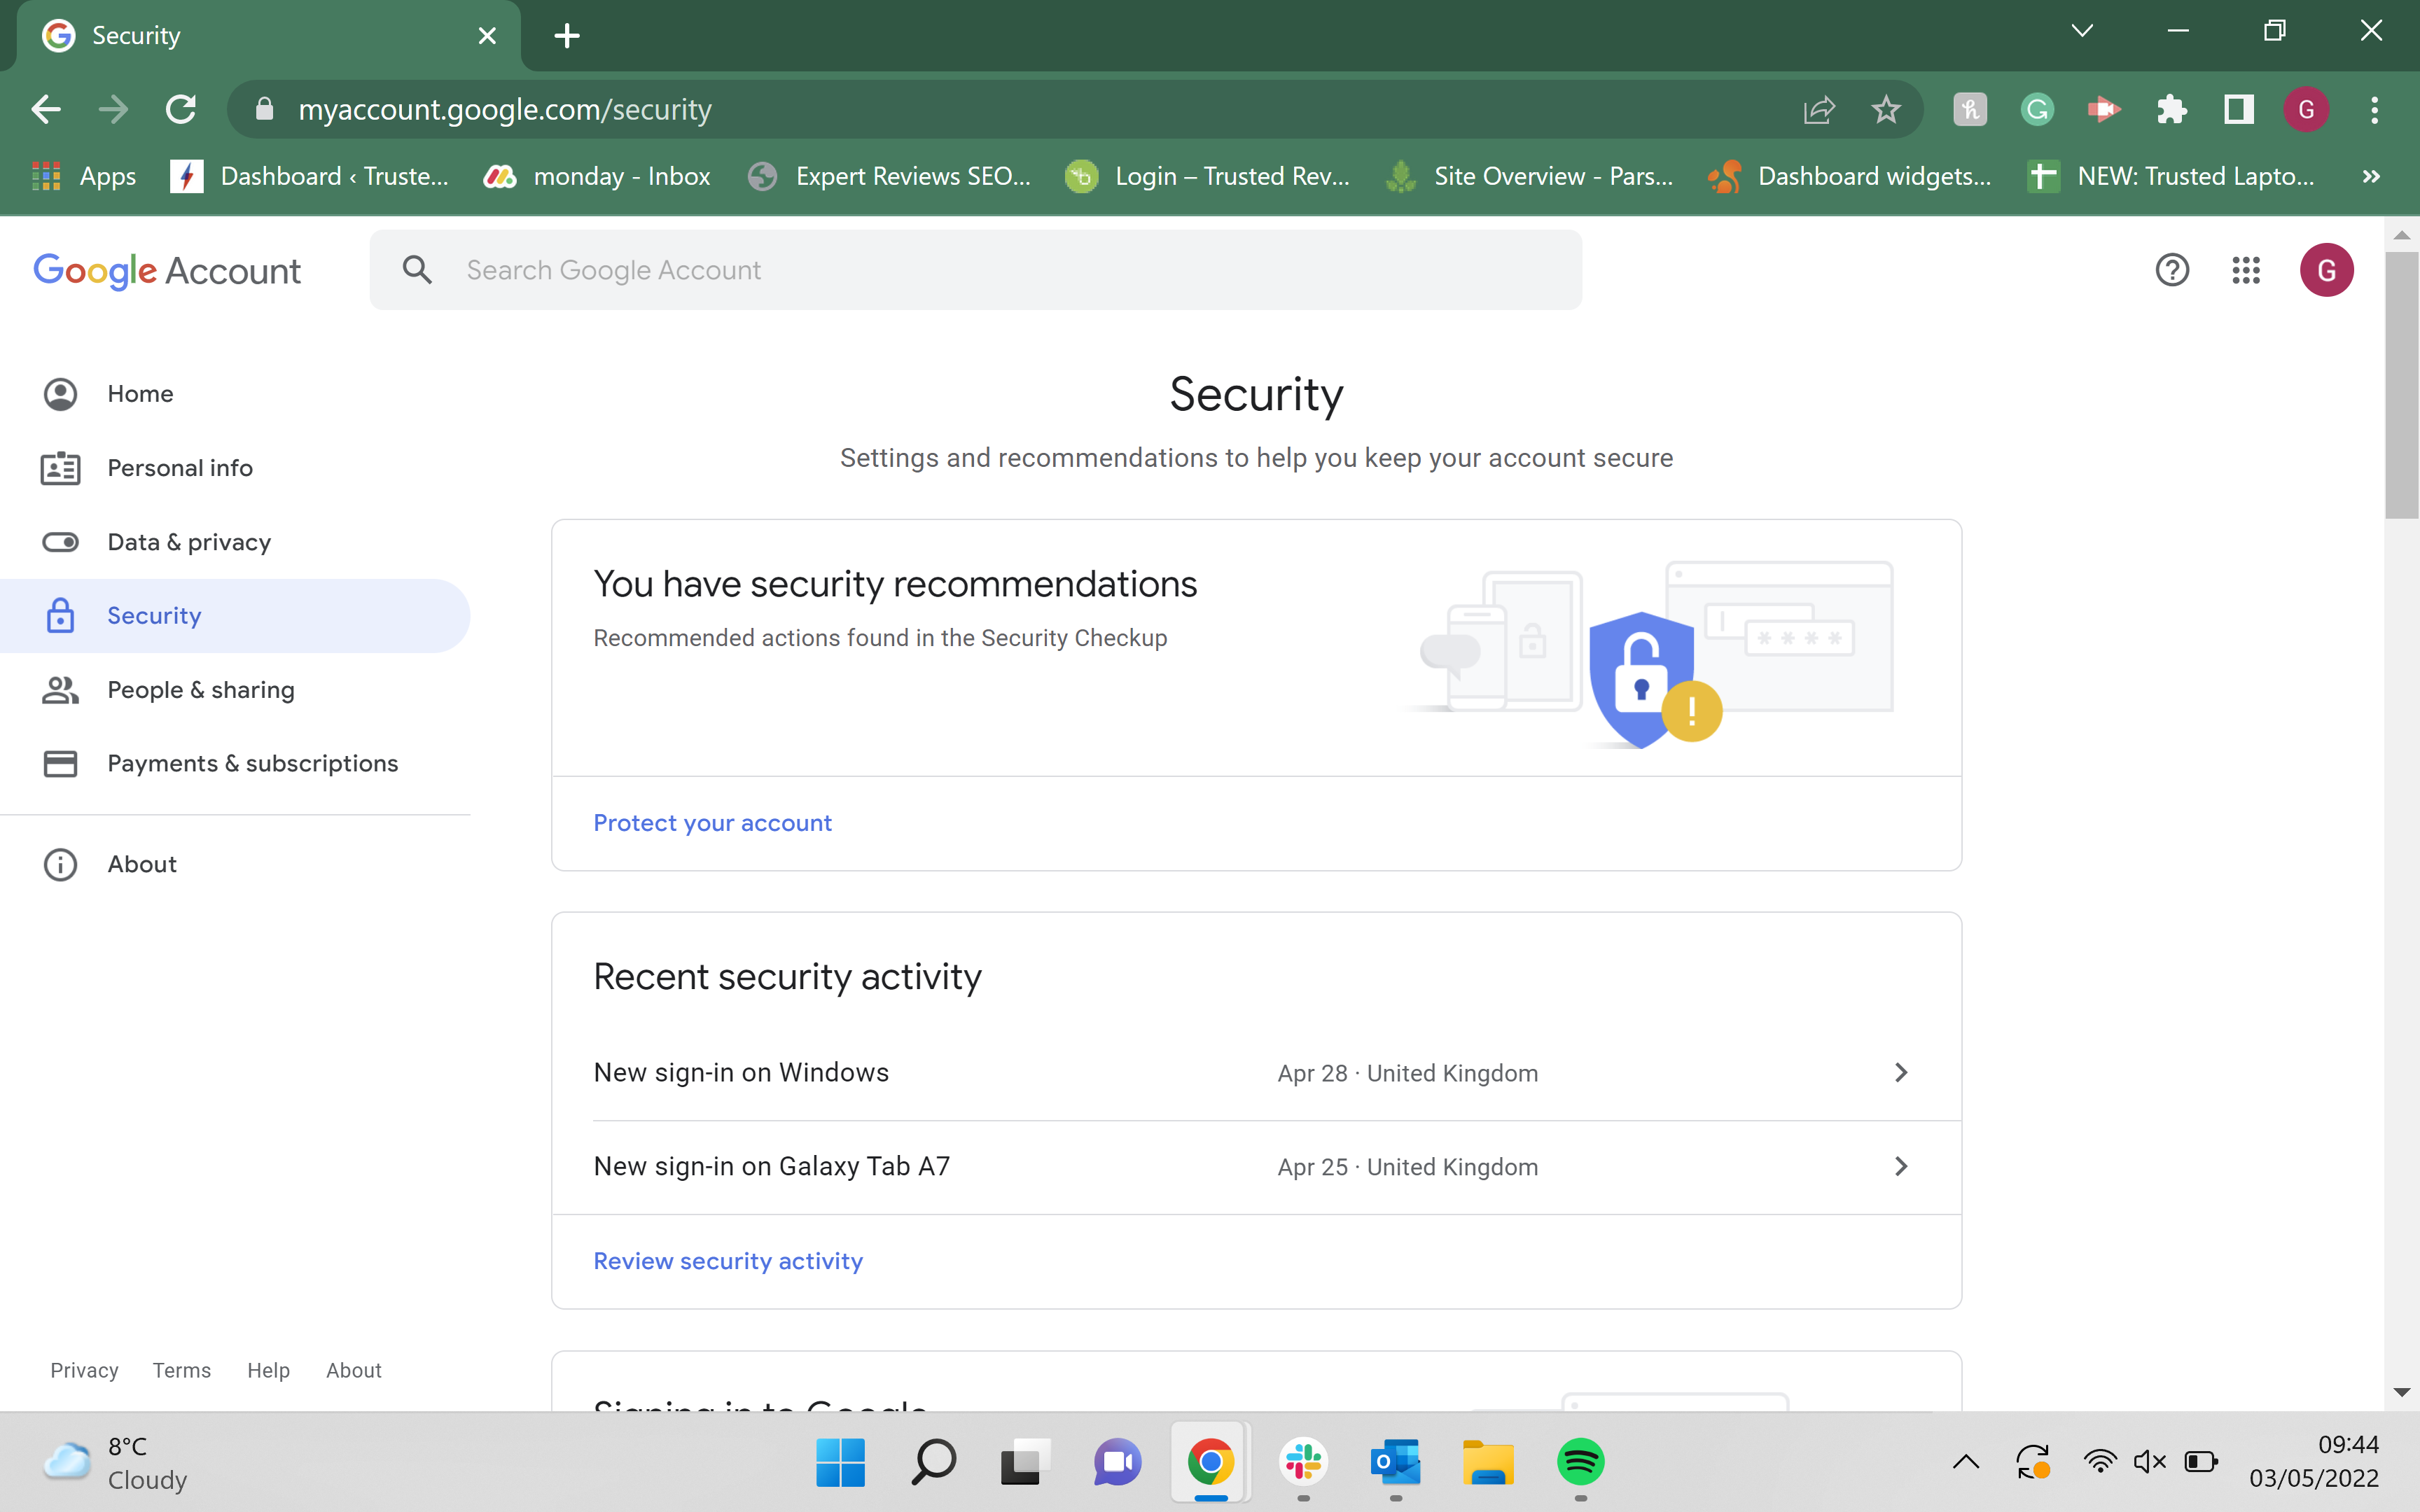 The security page in Google account